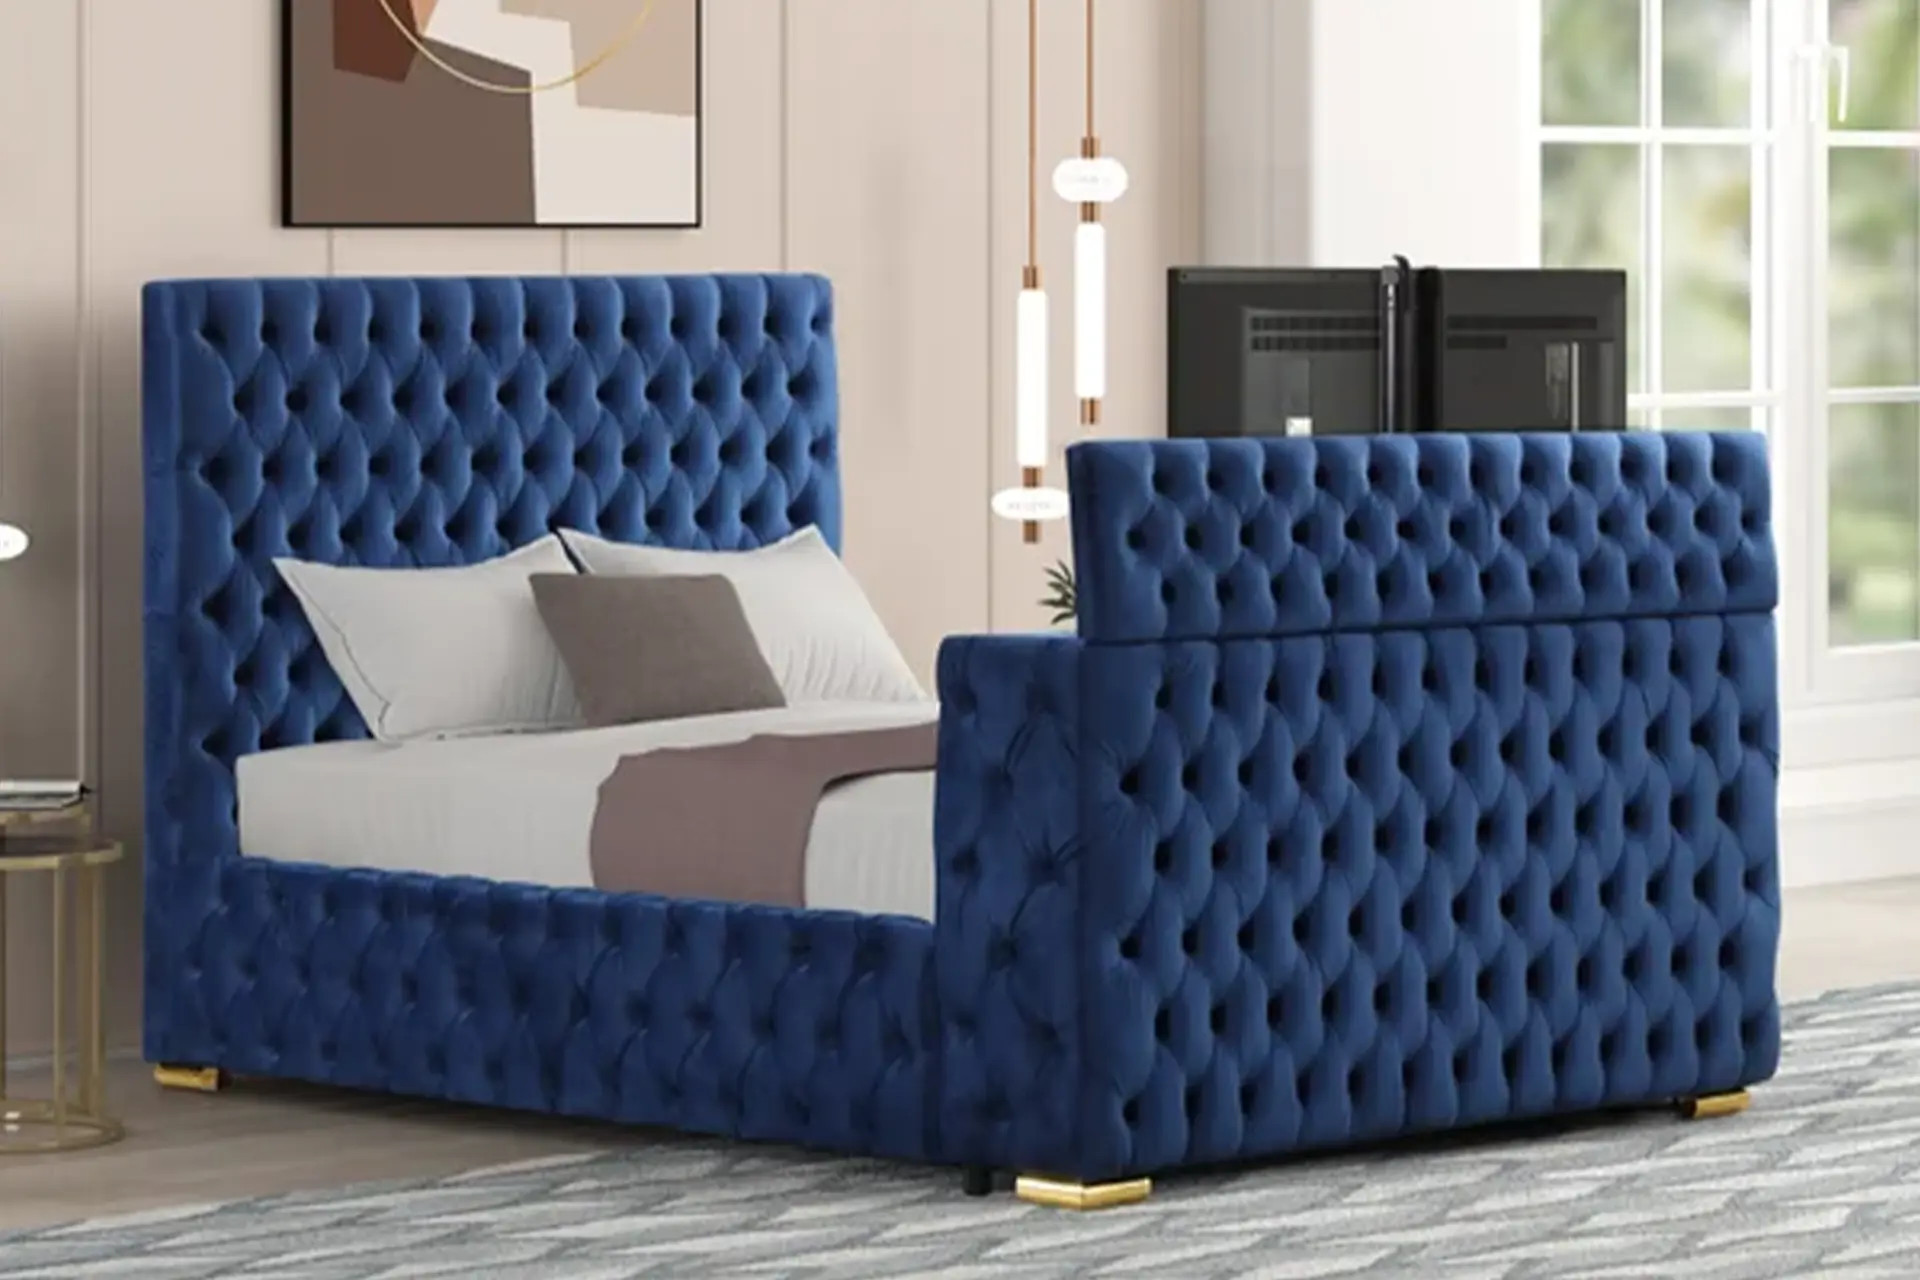 Blue Velvet Fireplace Bed with TV stand.